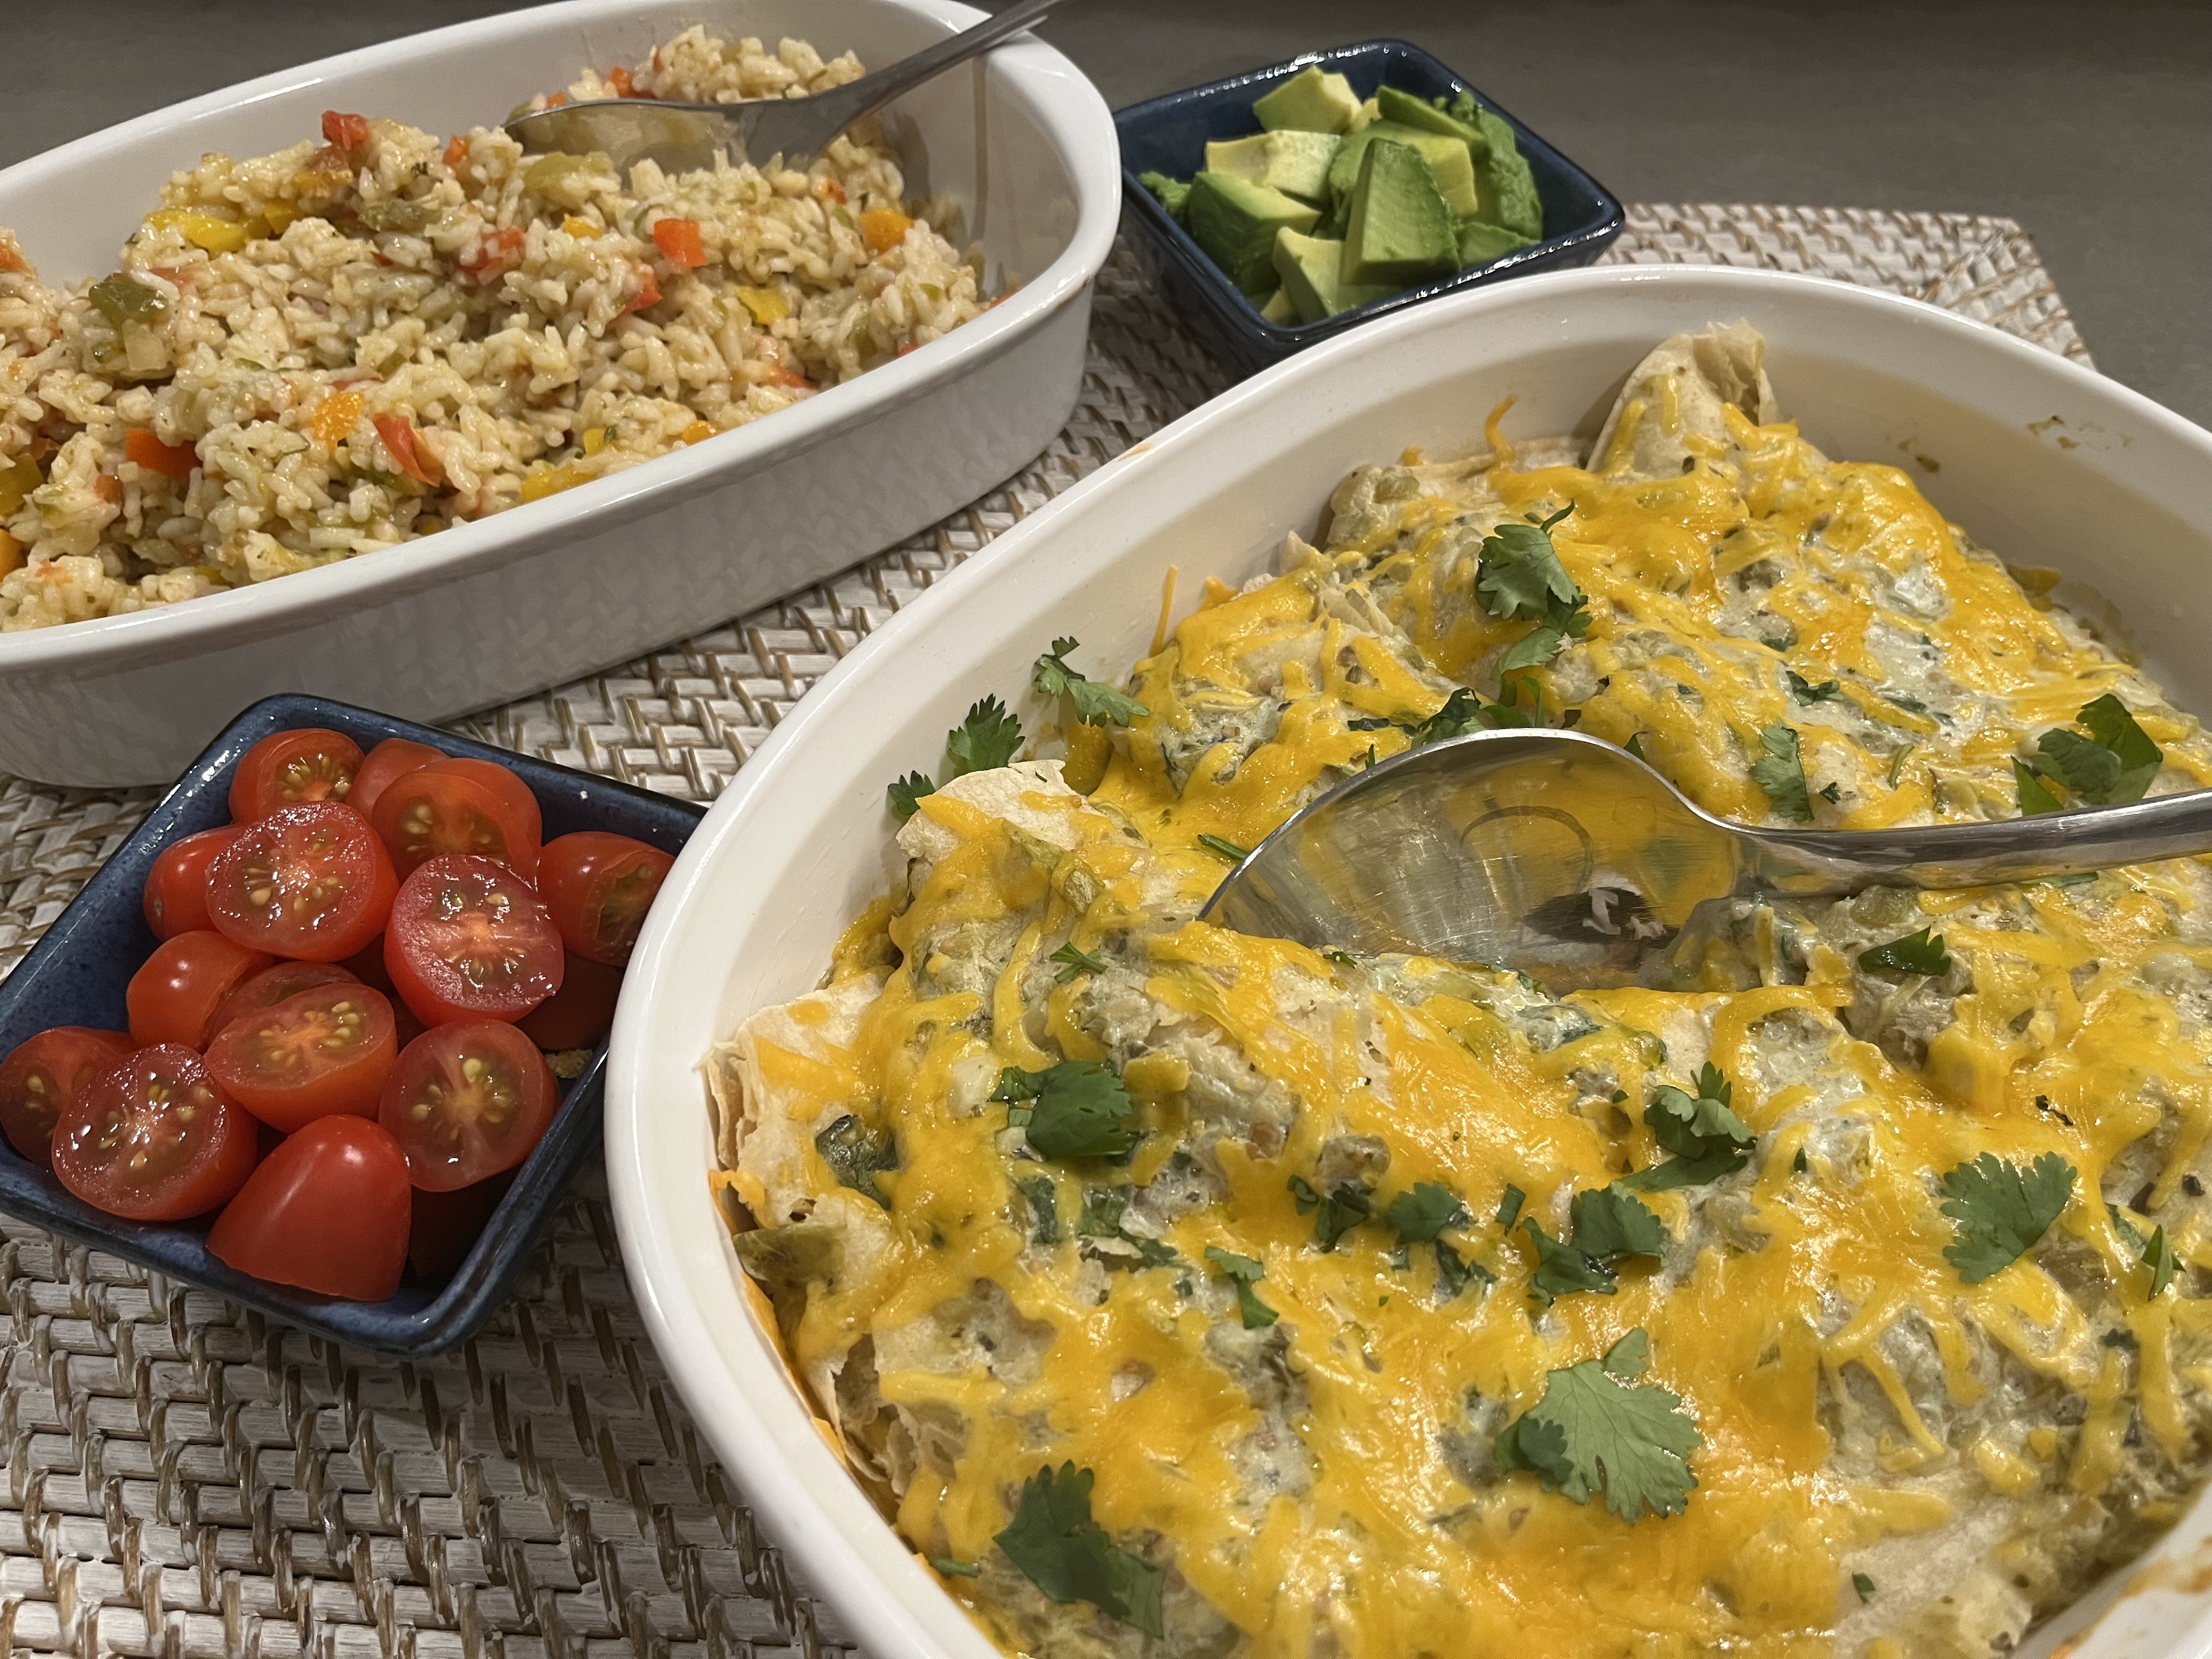 New Canaan Farms Verde Chili Salsa Chicken Enchiladas with Mexican Rice, tomatoes and avocados